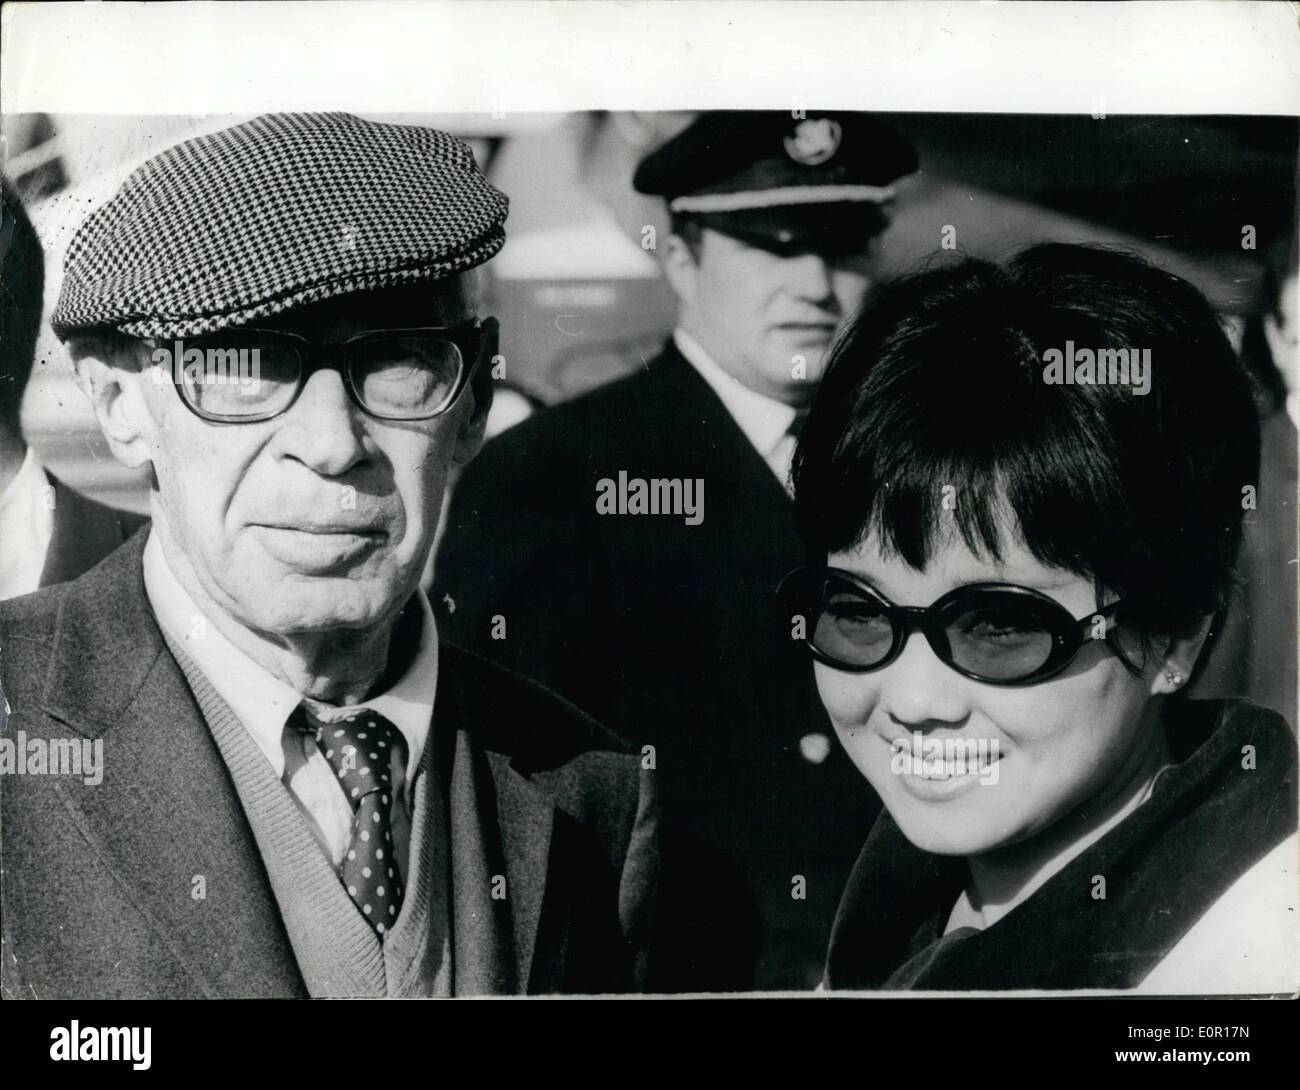 Sep. 09, 1957 - Henry Miller and His Bride Arrive in Paris. Henry Miller the 79 year old author from America arrived in Paris this afternoon with his 29 year old Japanese Bride Hoki Tokuda who is a singer. This is Henry Miller's fifth bride. Photo Shows: Henry Miller and his Japanese bride who he married last week in Los Angeles seen arriving in Paris for their honeymoon. Stock Photo